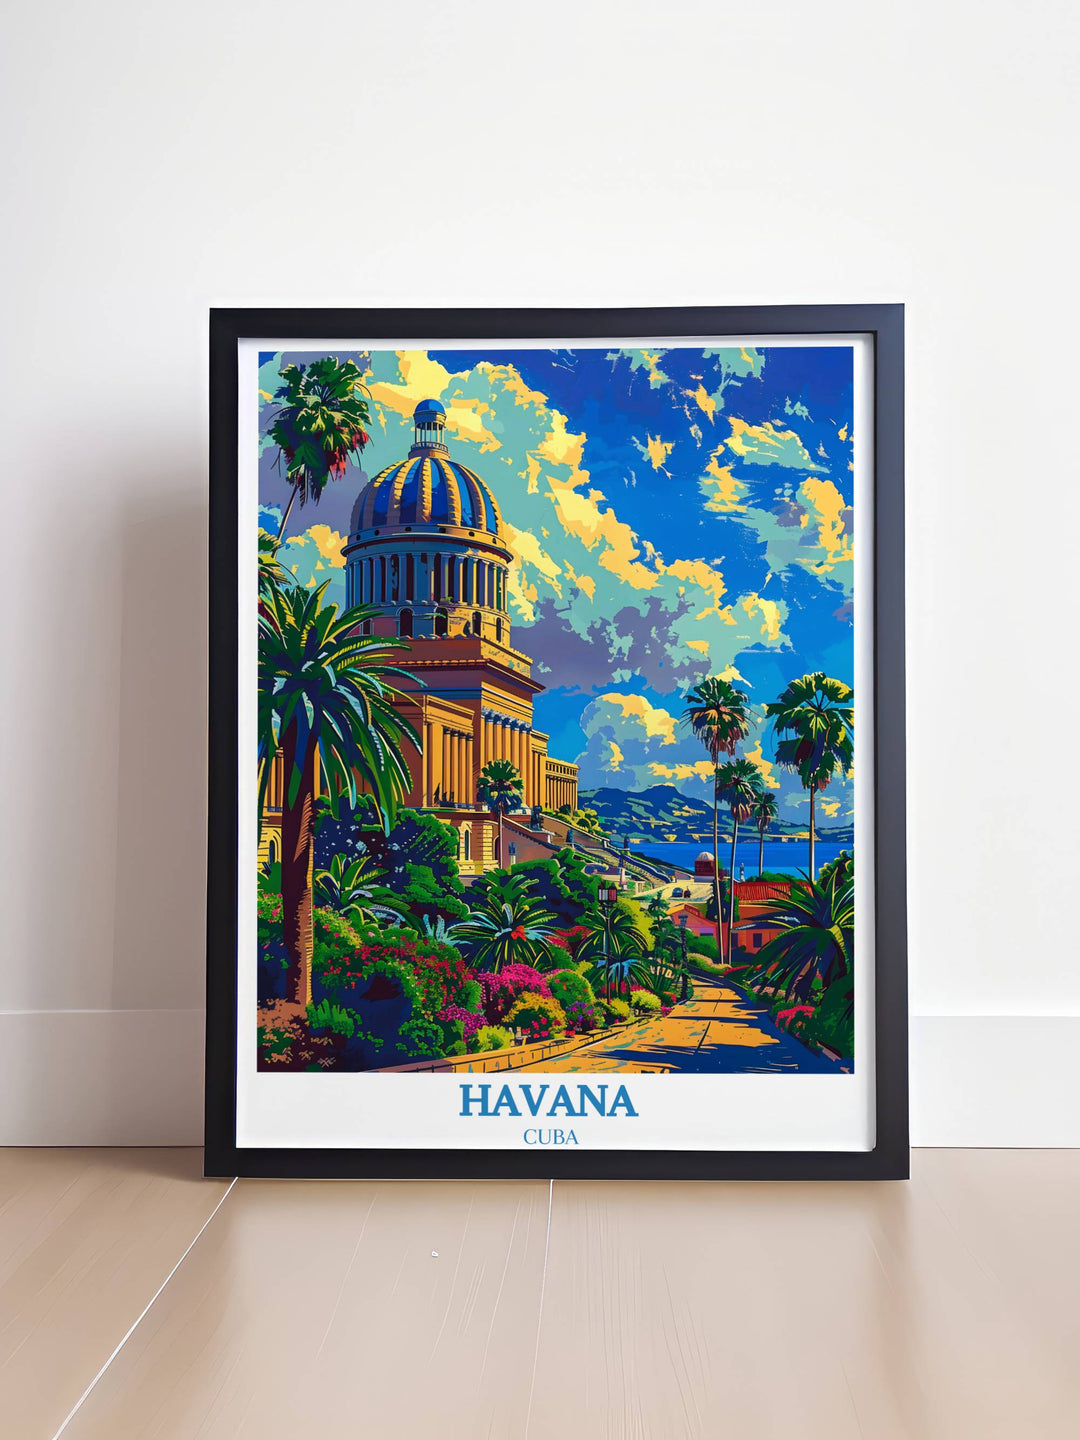 An exclusive art print of the National Capitol of Cuba, surrounded by lush greenery under the bright Cuban sun, showcasing the intricate details and historical beauty of Havanas prized structure.